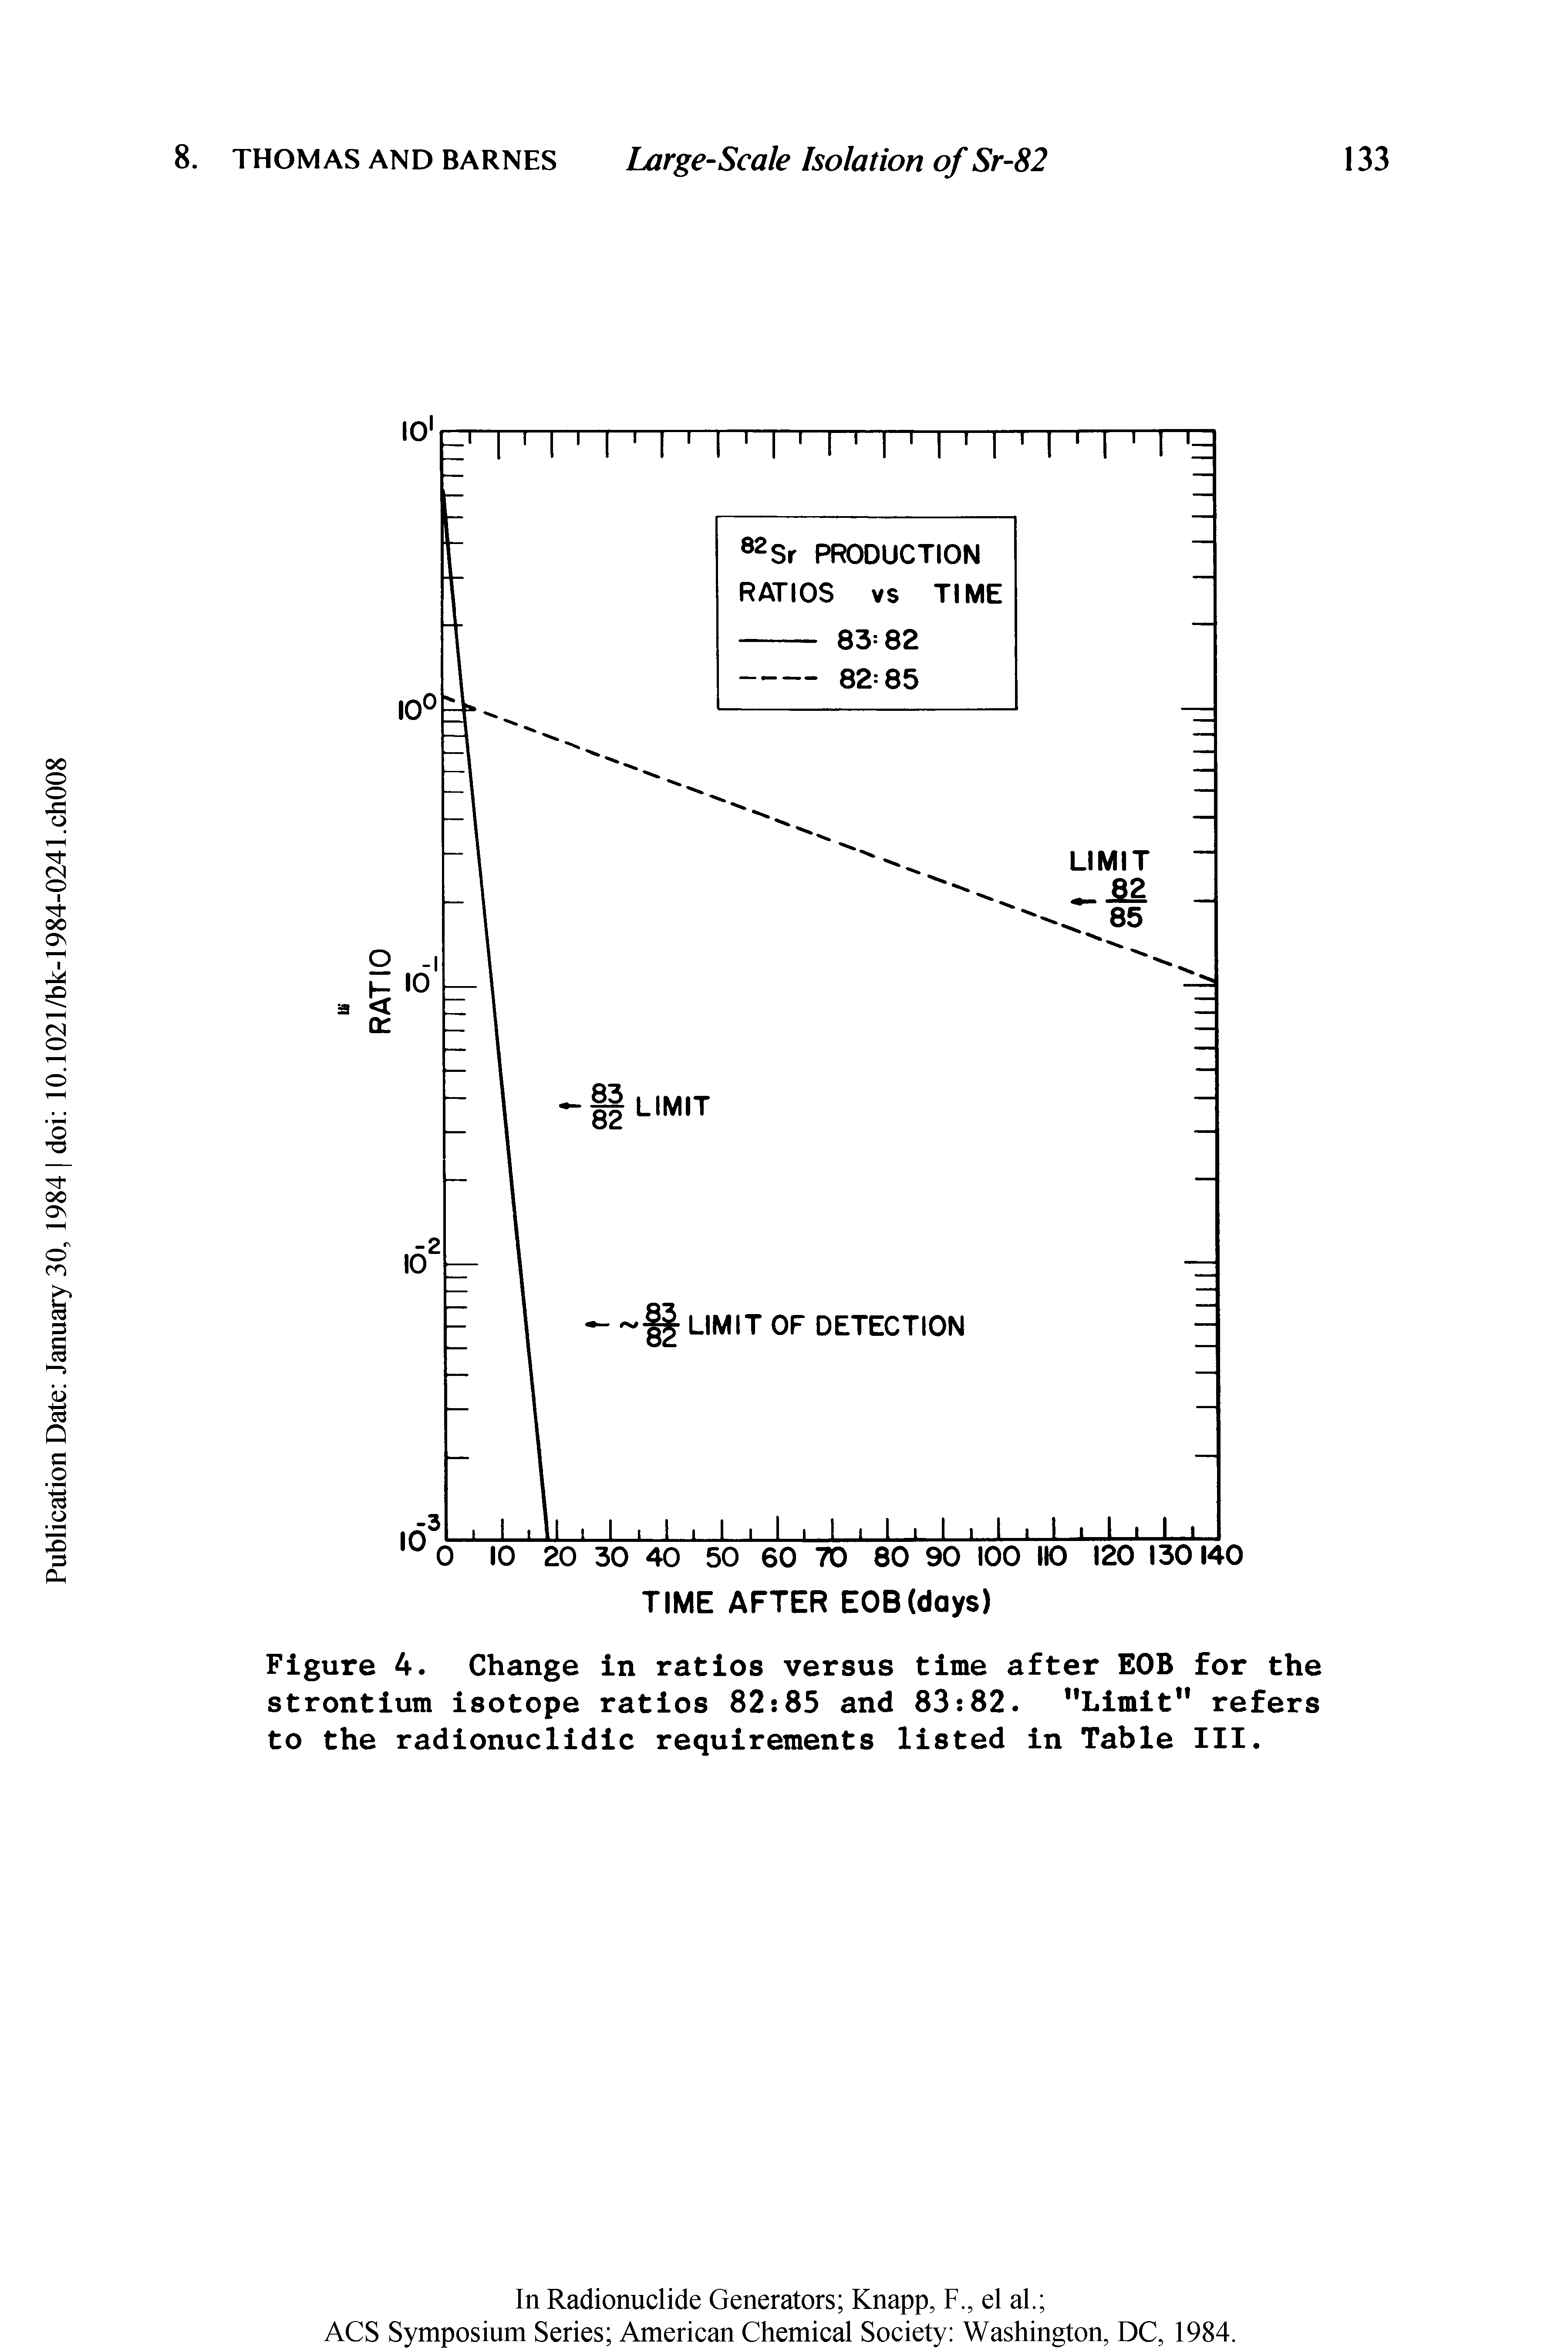 Figure 4. Change in ratios versus time after EOB for the strontium isotope ratios 82 85 and 83 82. "Limit" refers to the radionuclidic requirements listed in Table III.